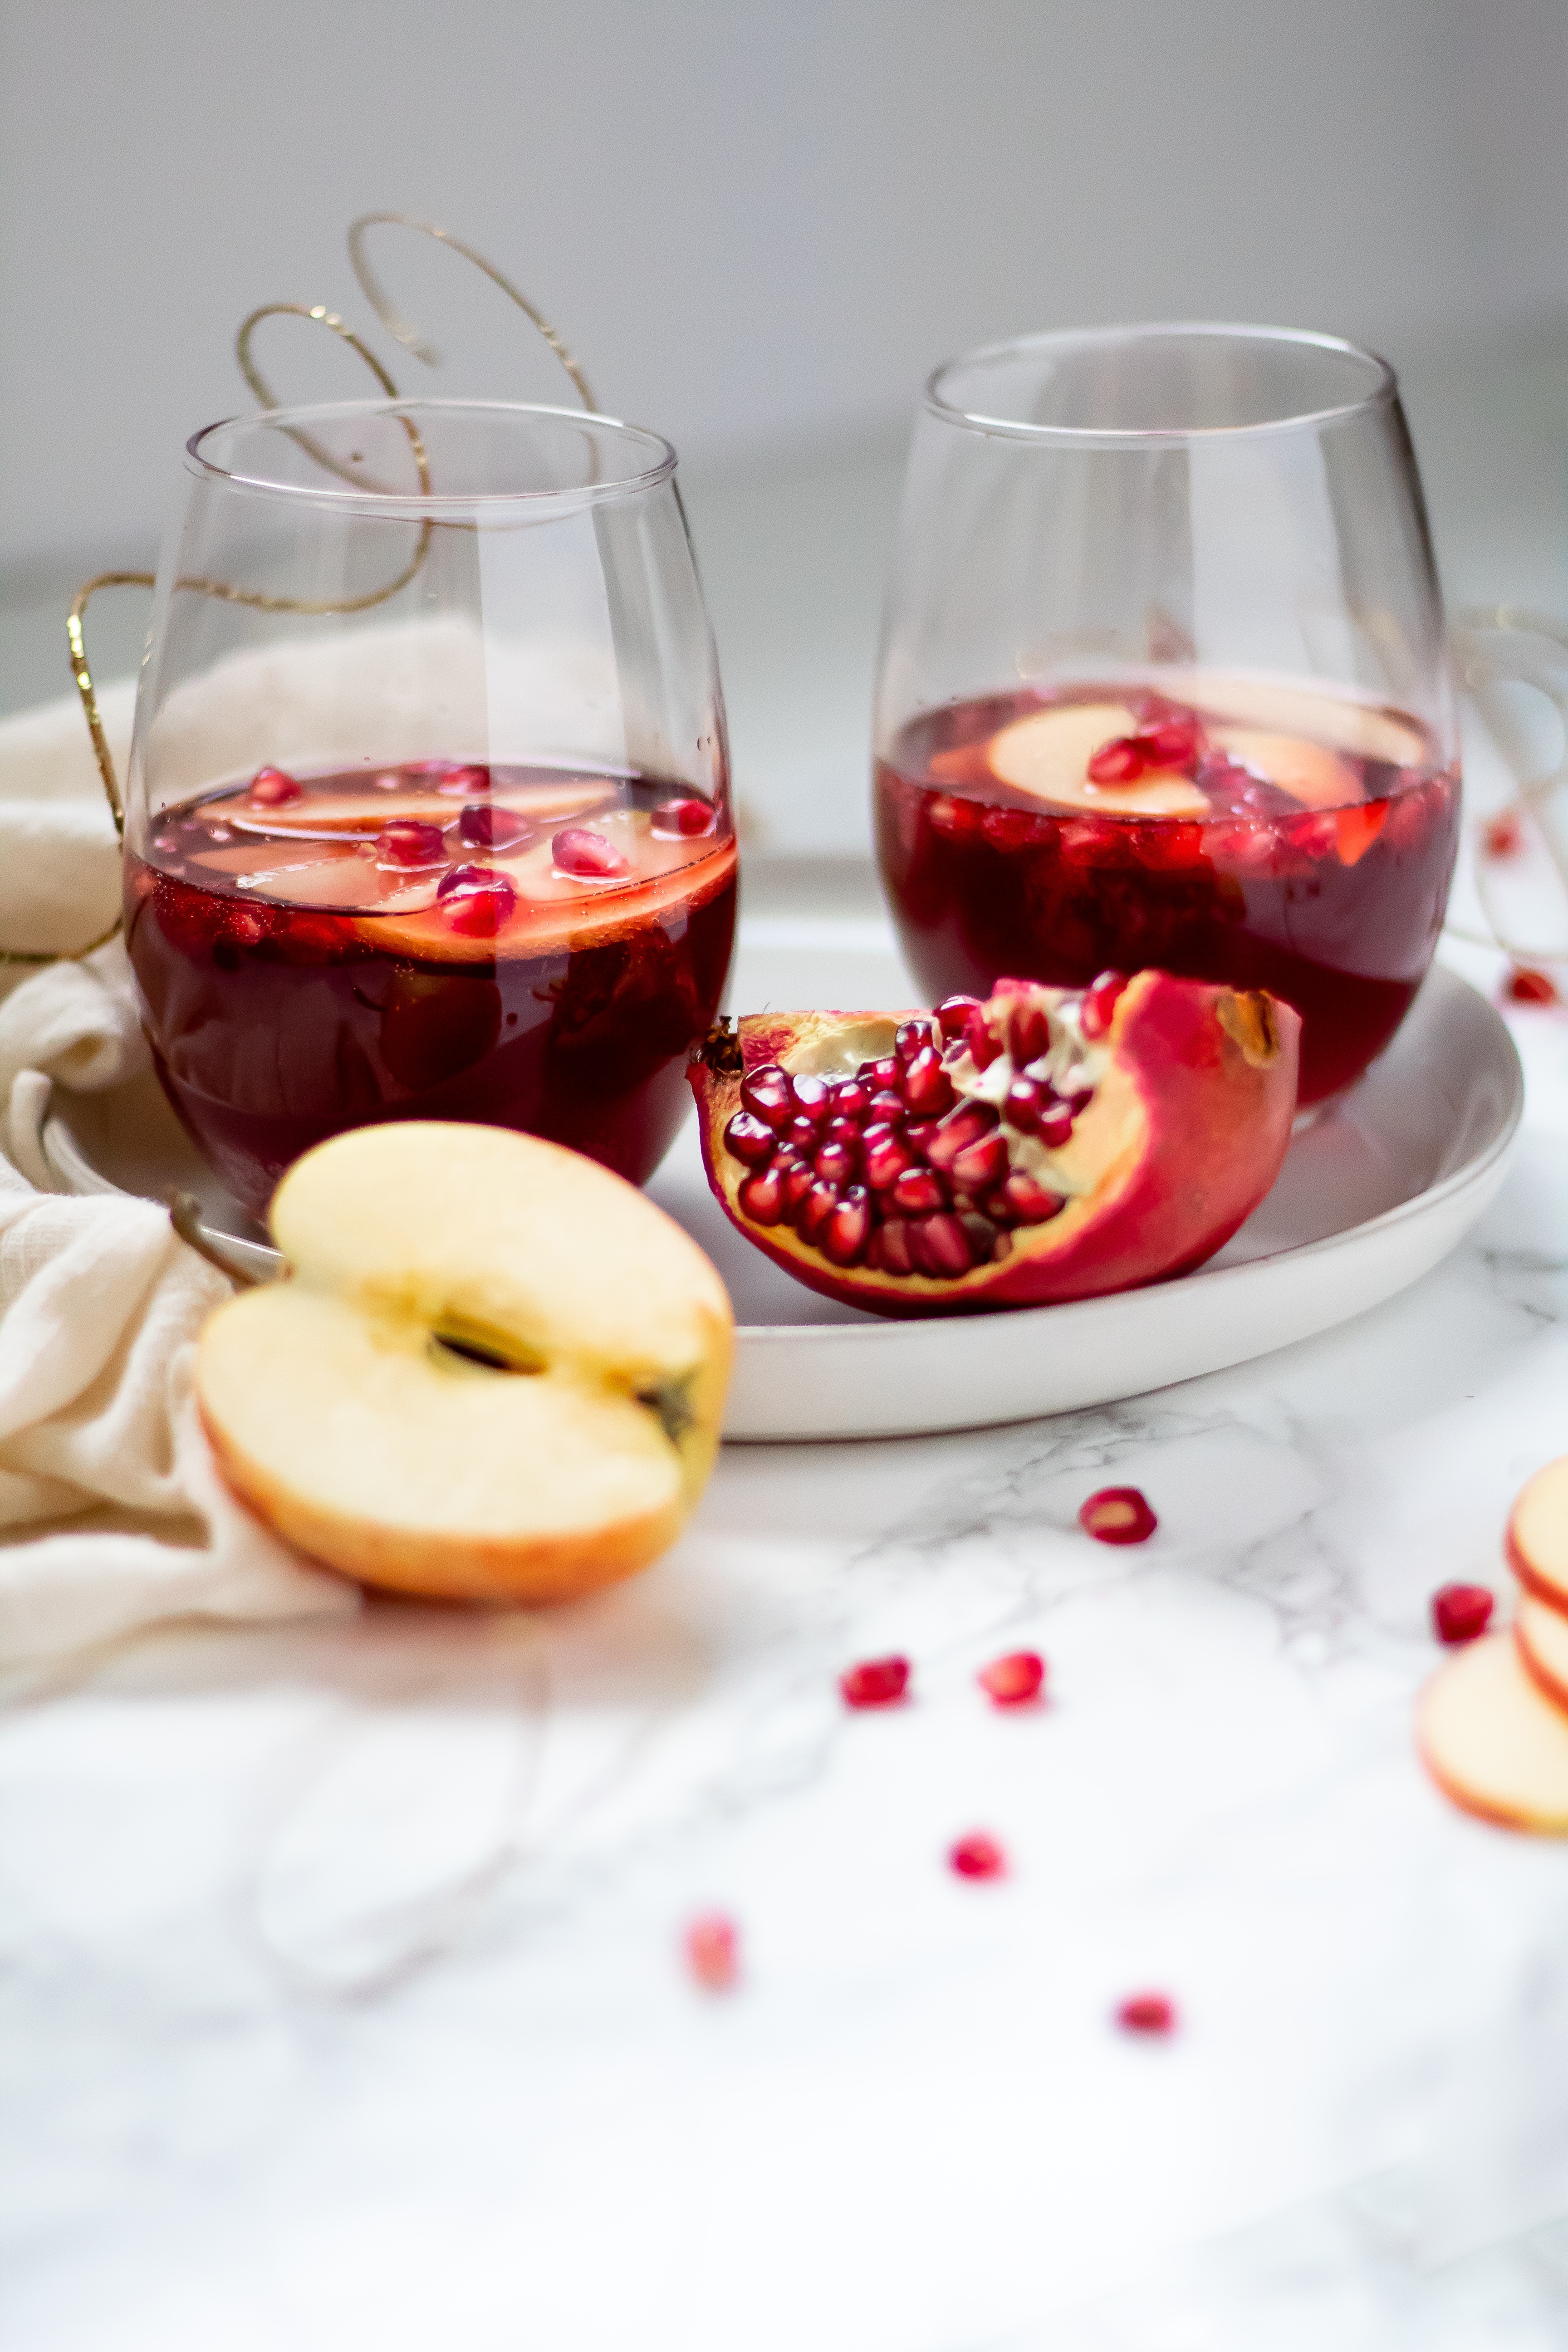 Three simple ingredients create a festive, holiday mocktail the whole family can enjoy. Try fun infusions to get even more creative with your healthy mocktail!